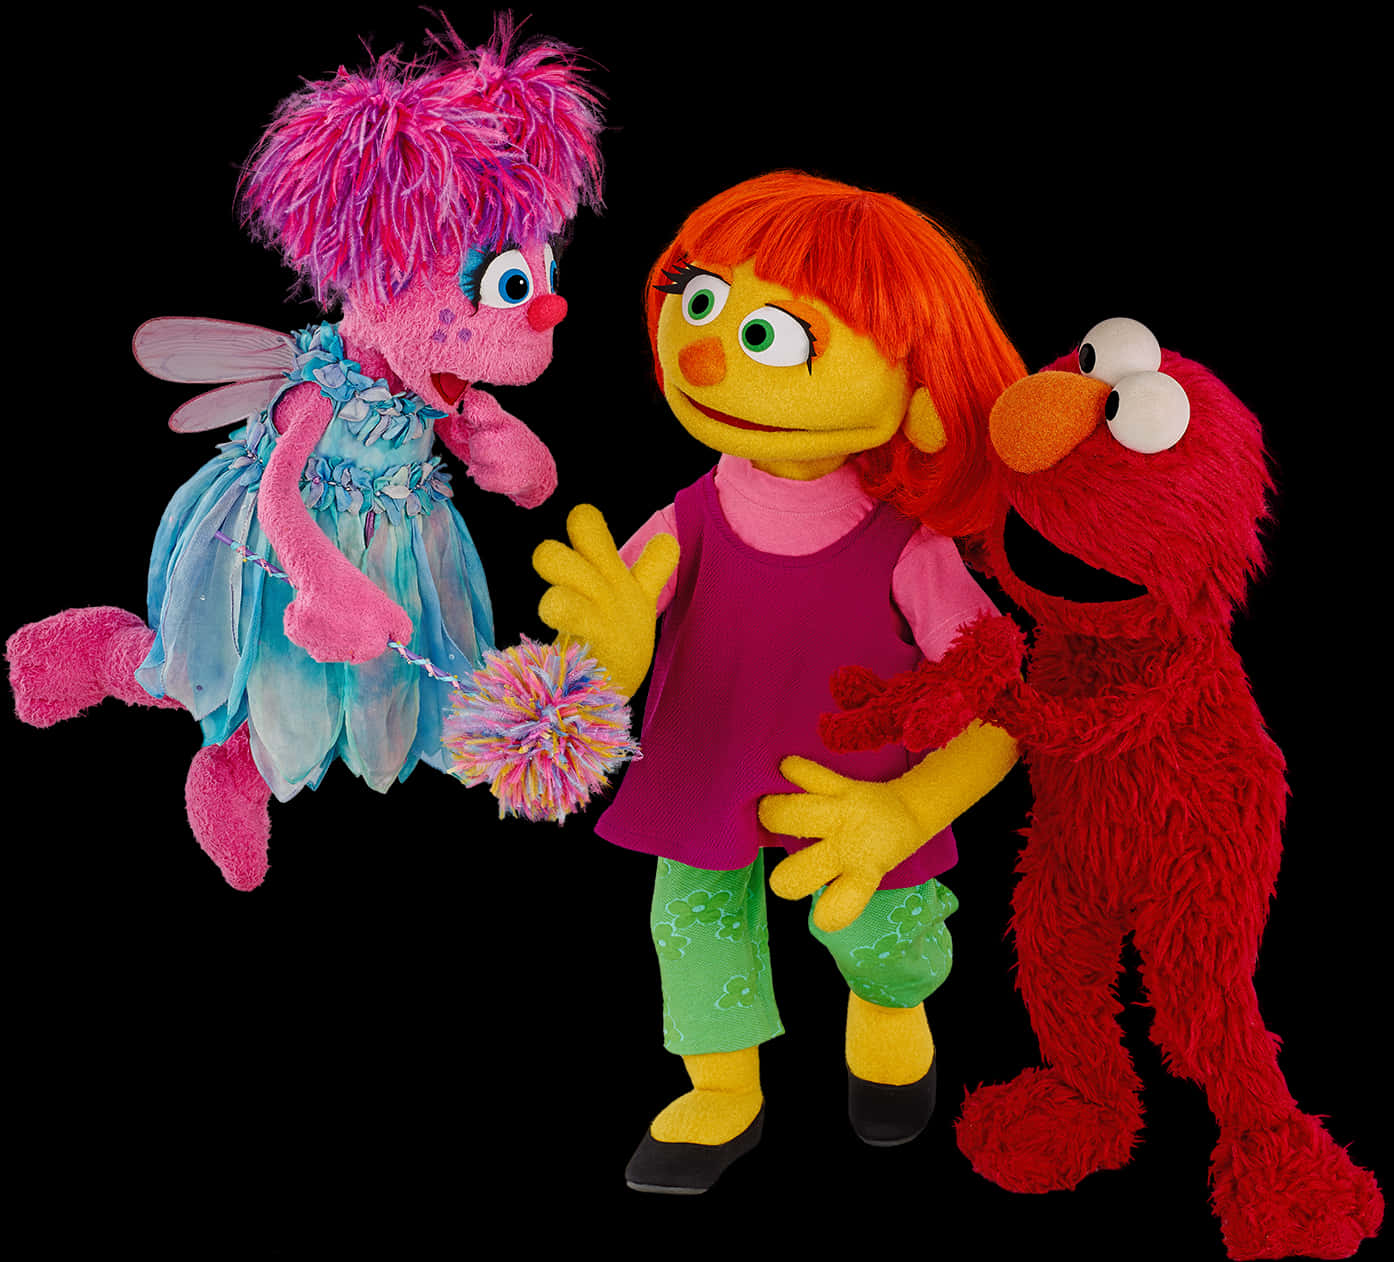 A Group Of Puppets On A Black Background